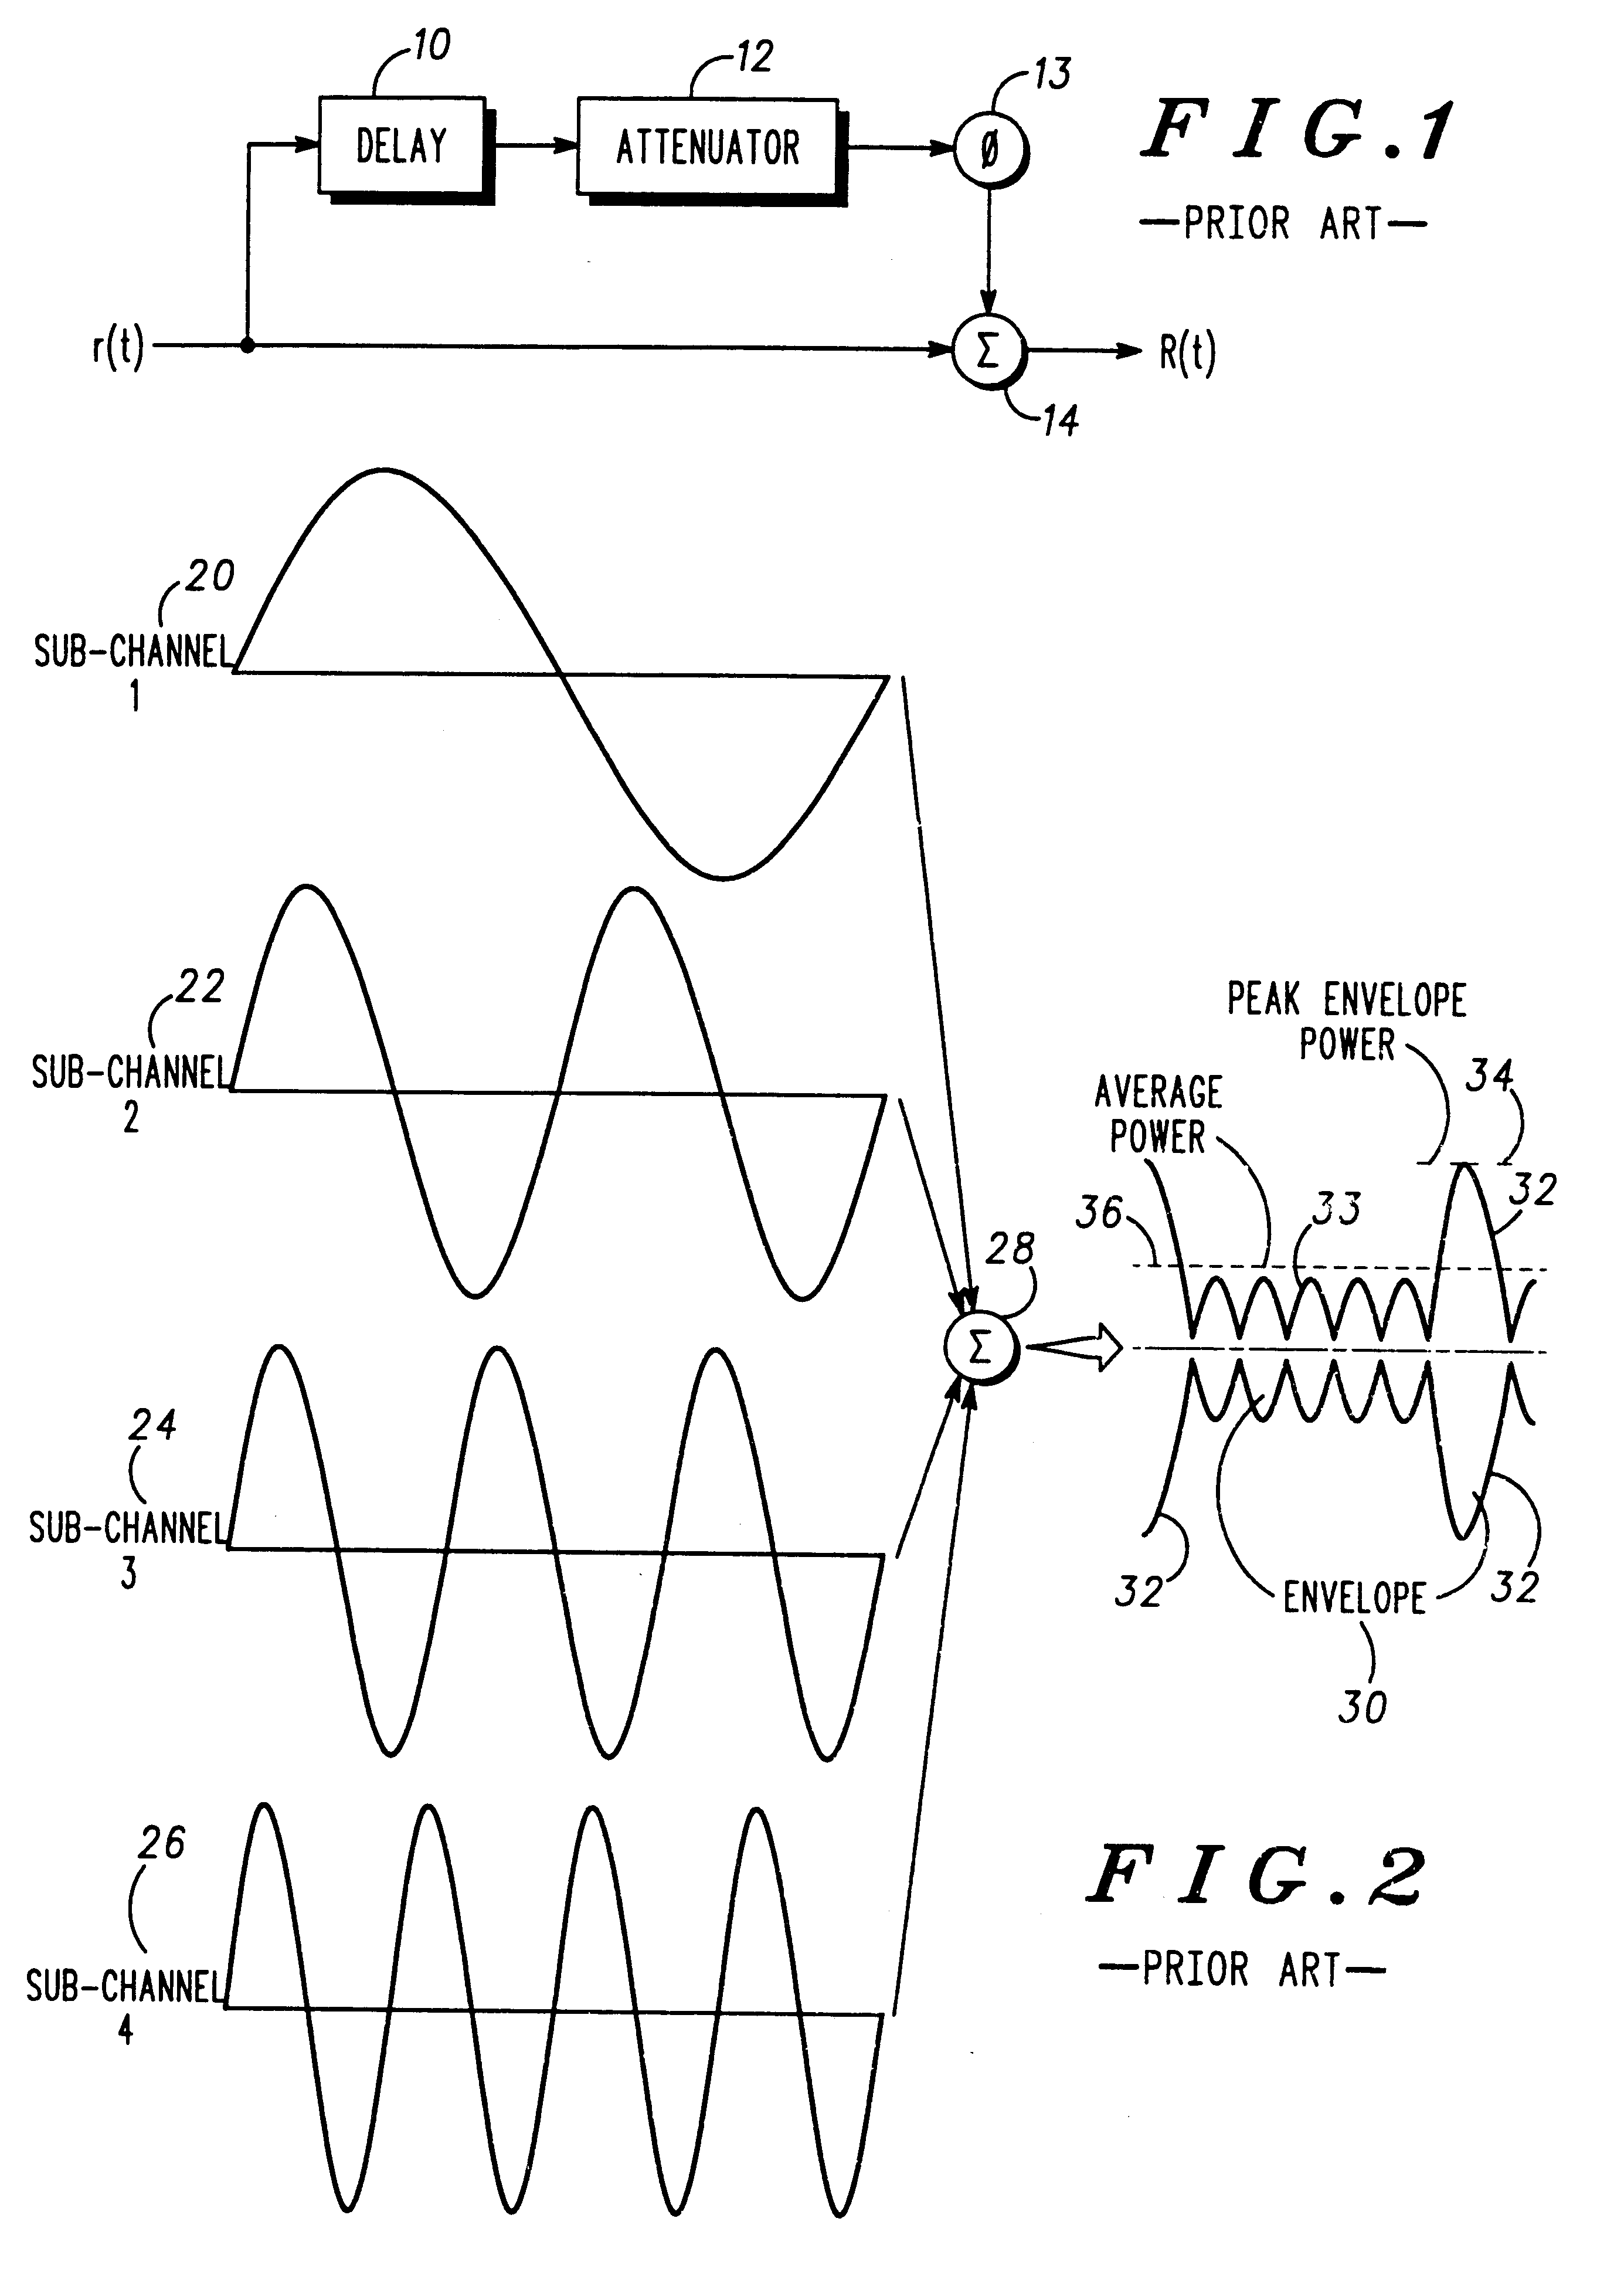 Multicarrier communication system and method for peak power control